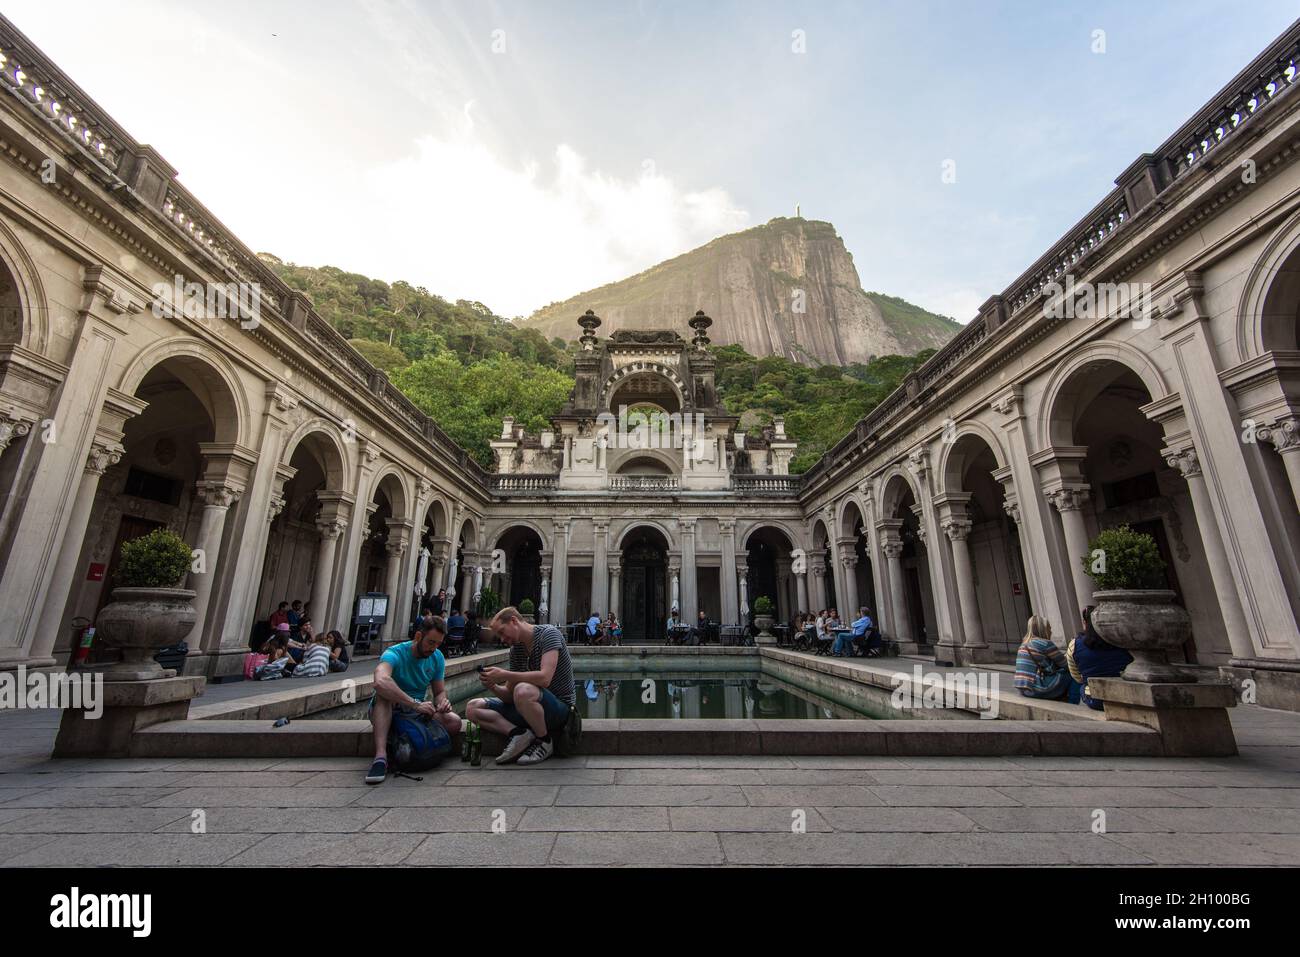 RIO DE JANEIRO, BRAZIL - JULY 8, 2016: Courtyard of the mansion of Parque Lage. Visual Arts School and a cafe are open to the public. Stock Photo